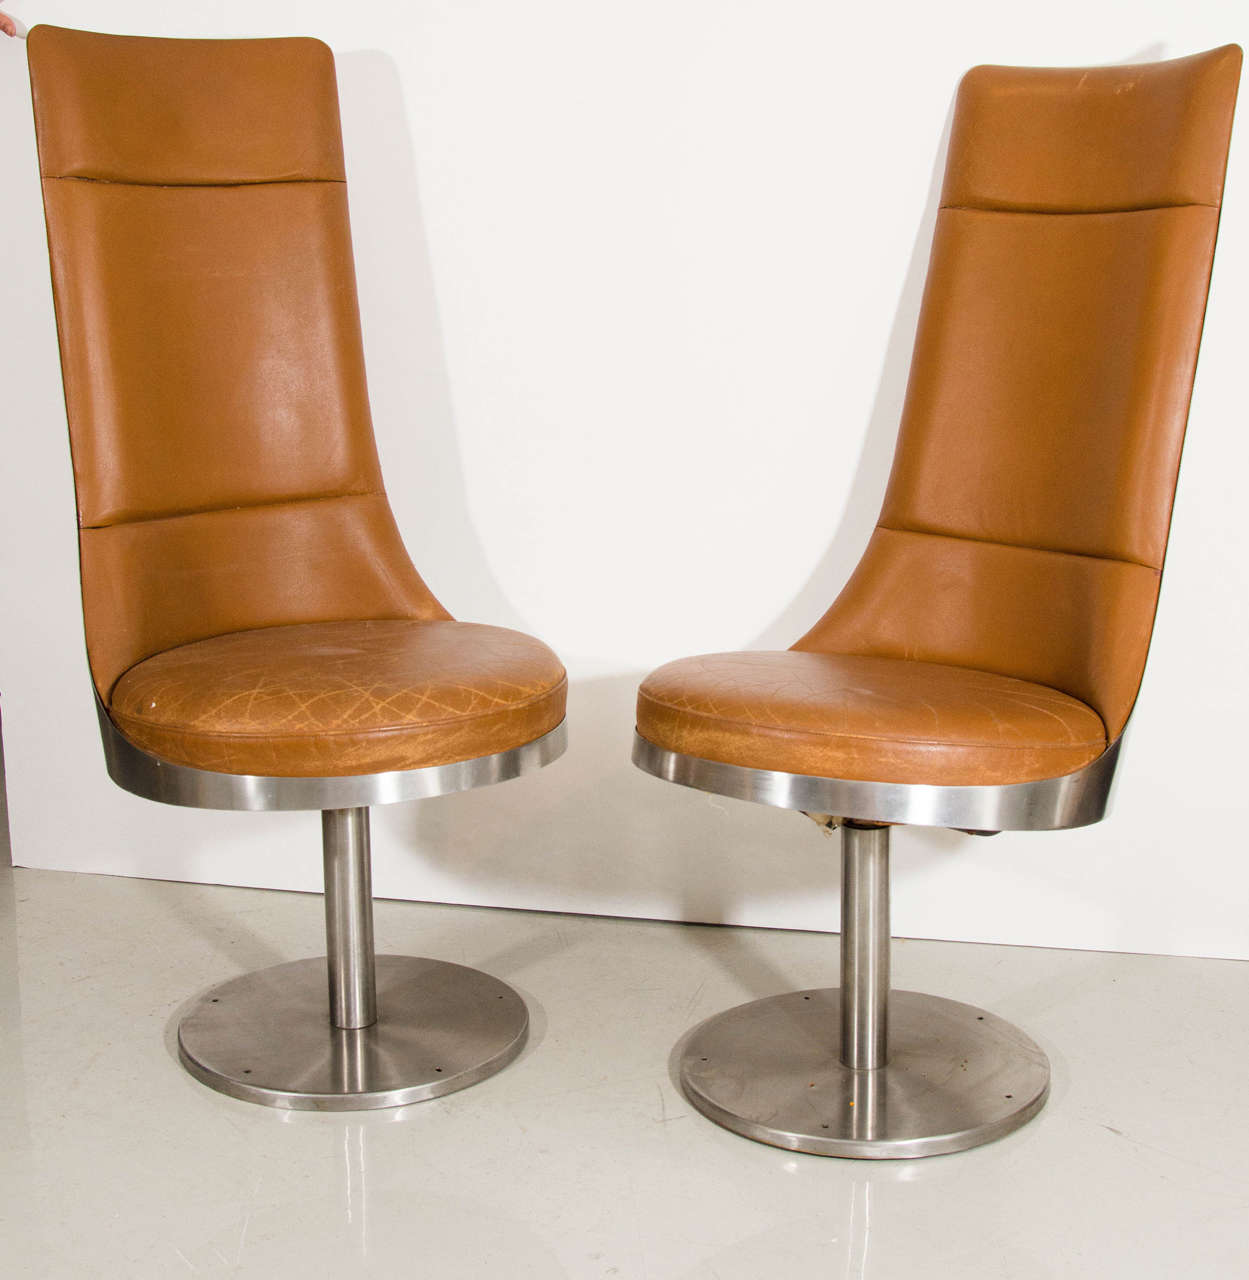 A rare pair of leather and steel chairs by Maria Pergay. We have two pairs.